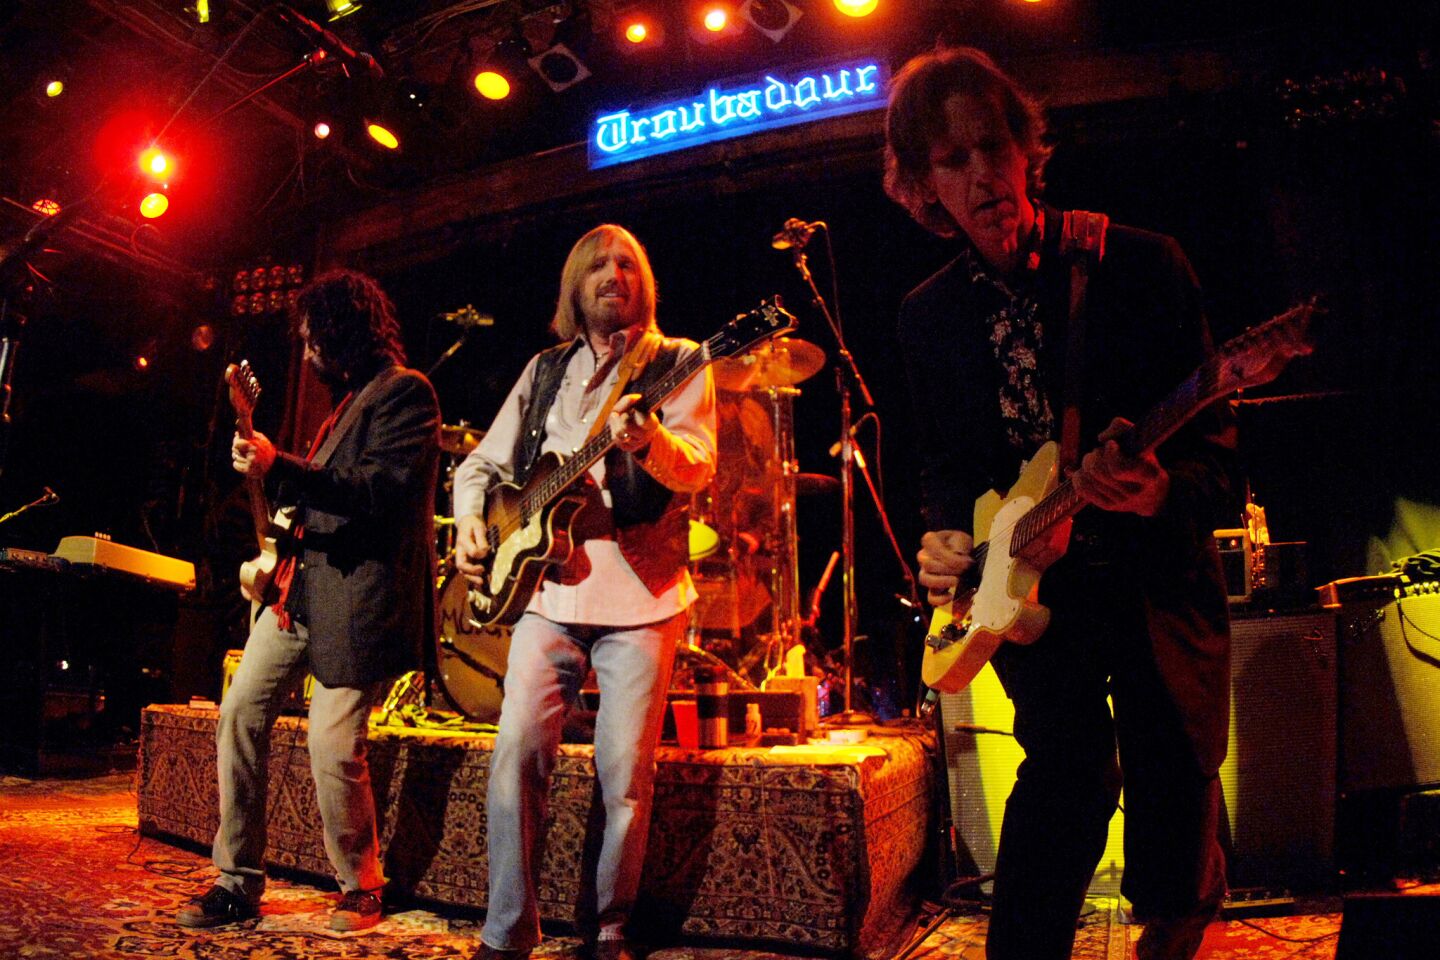 Tom Petty | Career in pictures